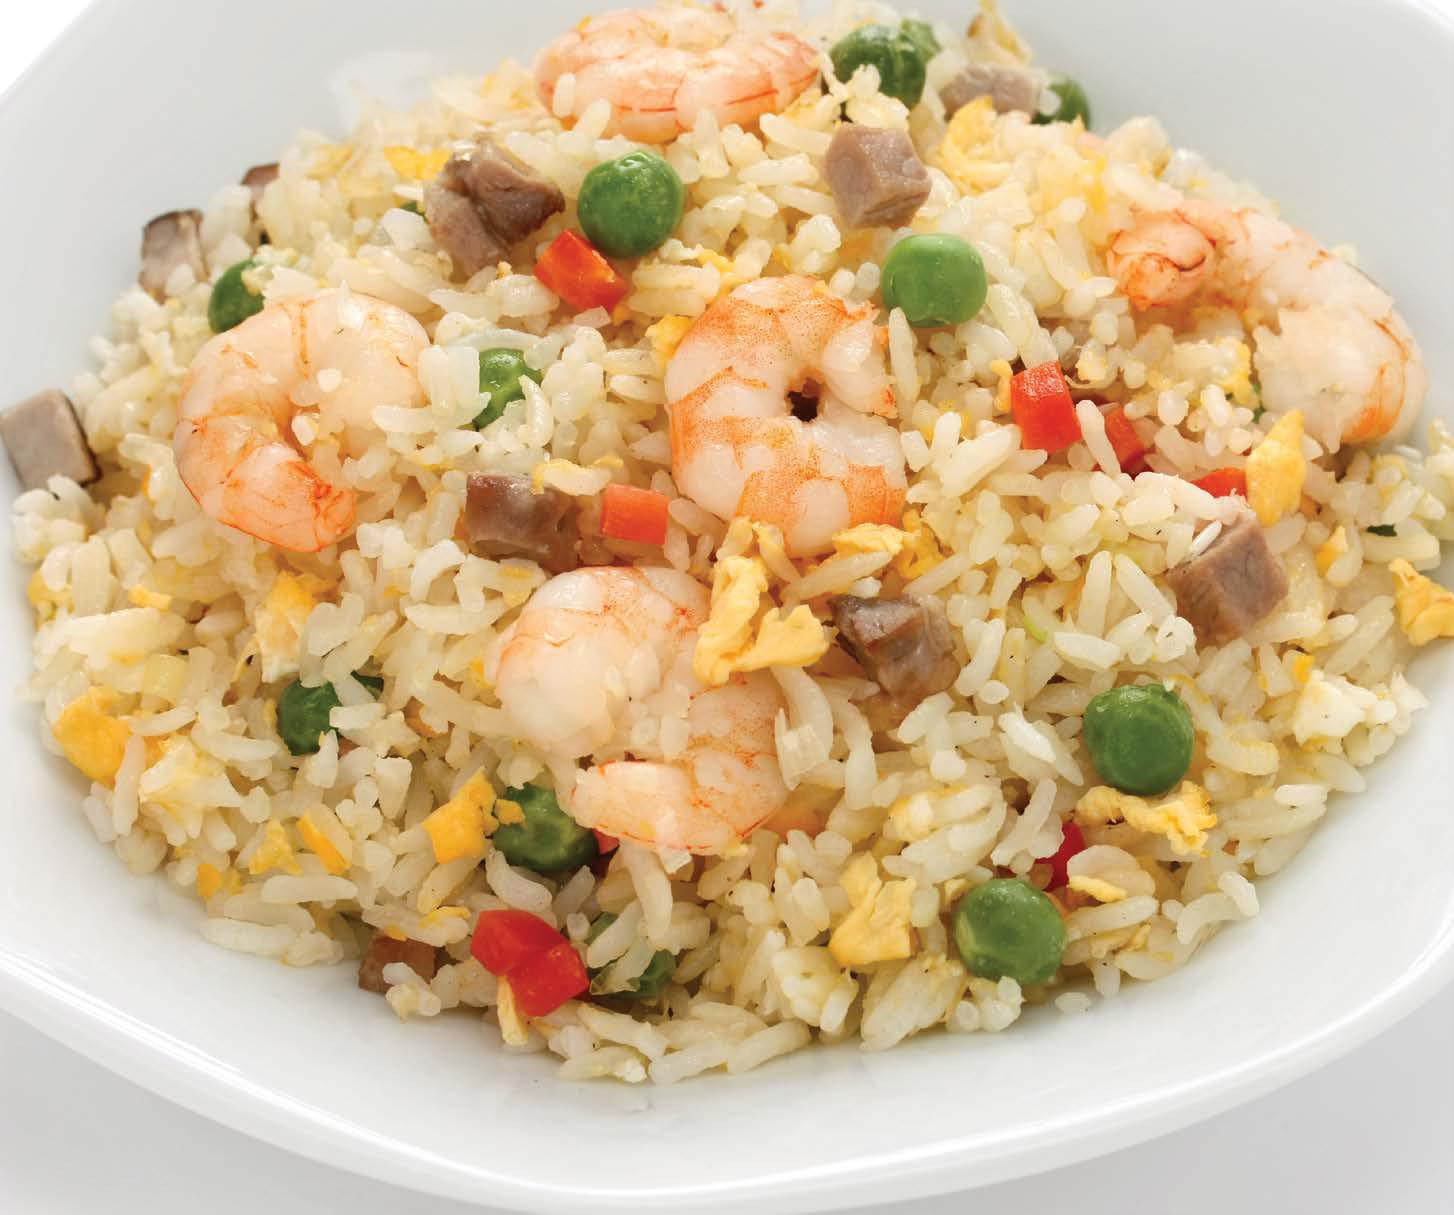 Yangzhou fried rice is one of the most famous fried rice dishes in China - photo 8